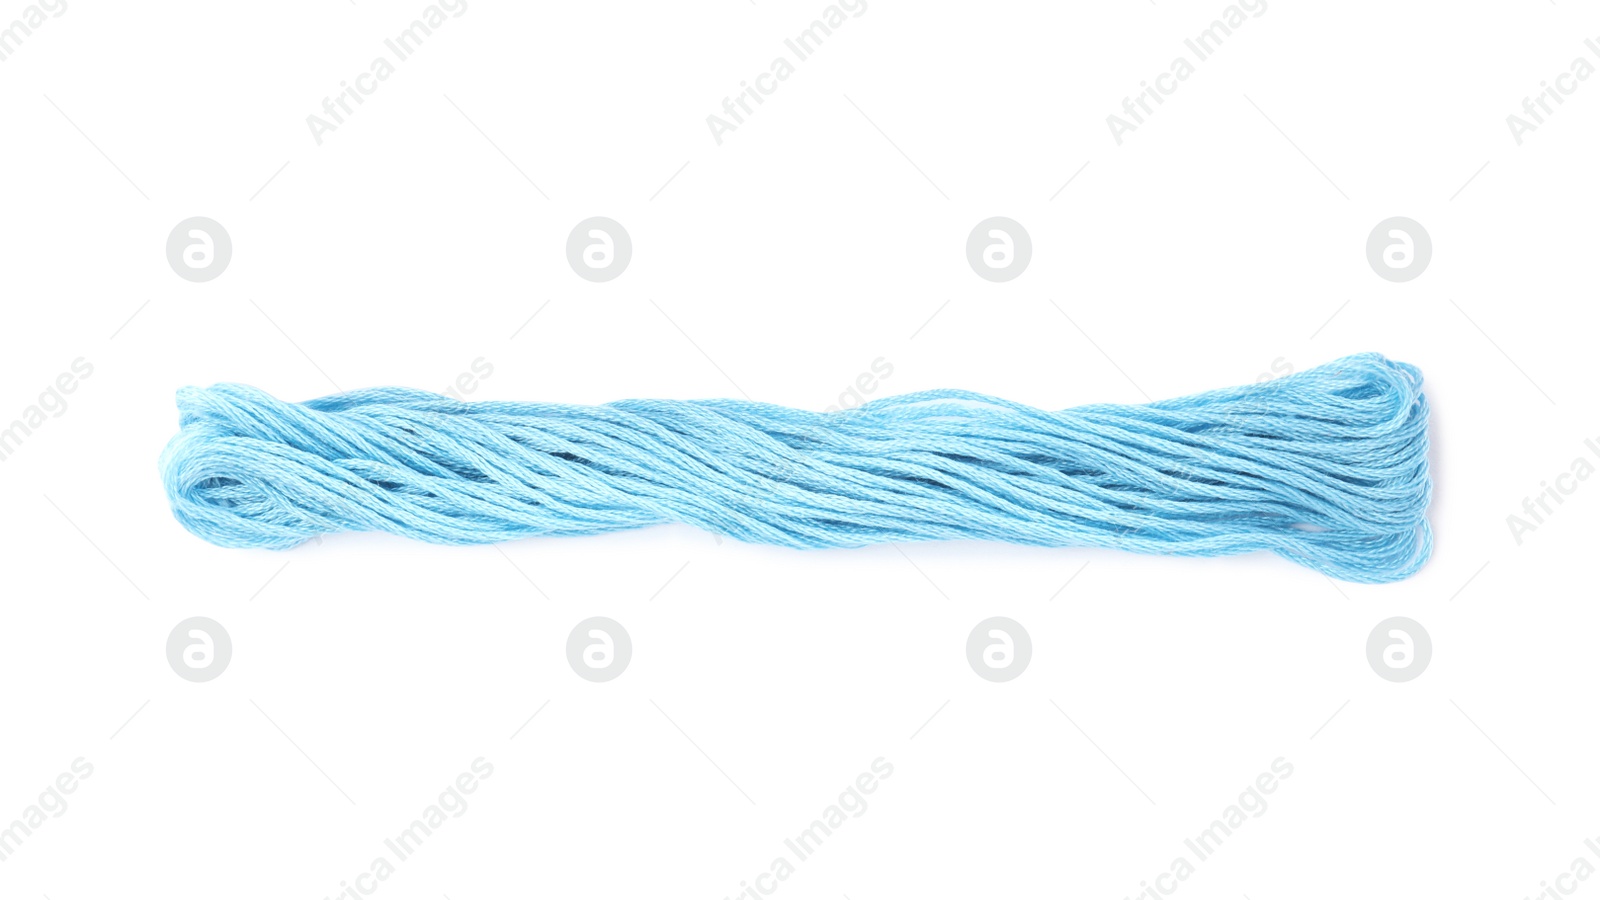 Photo of Light blue embroidery thread on white background